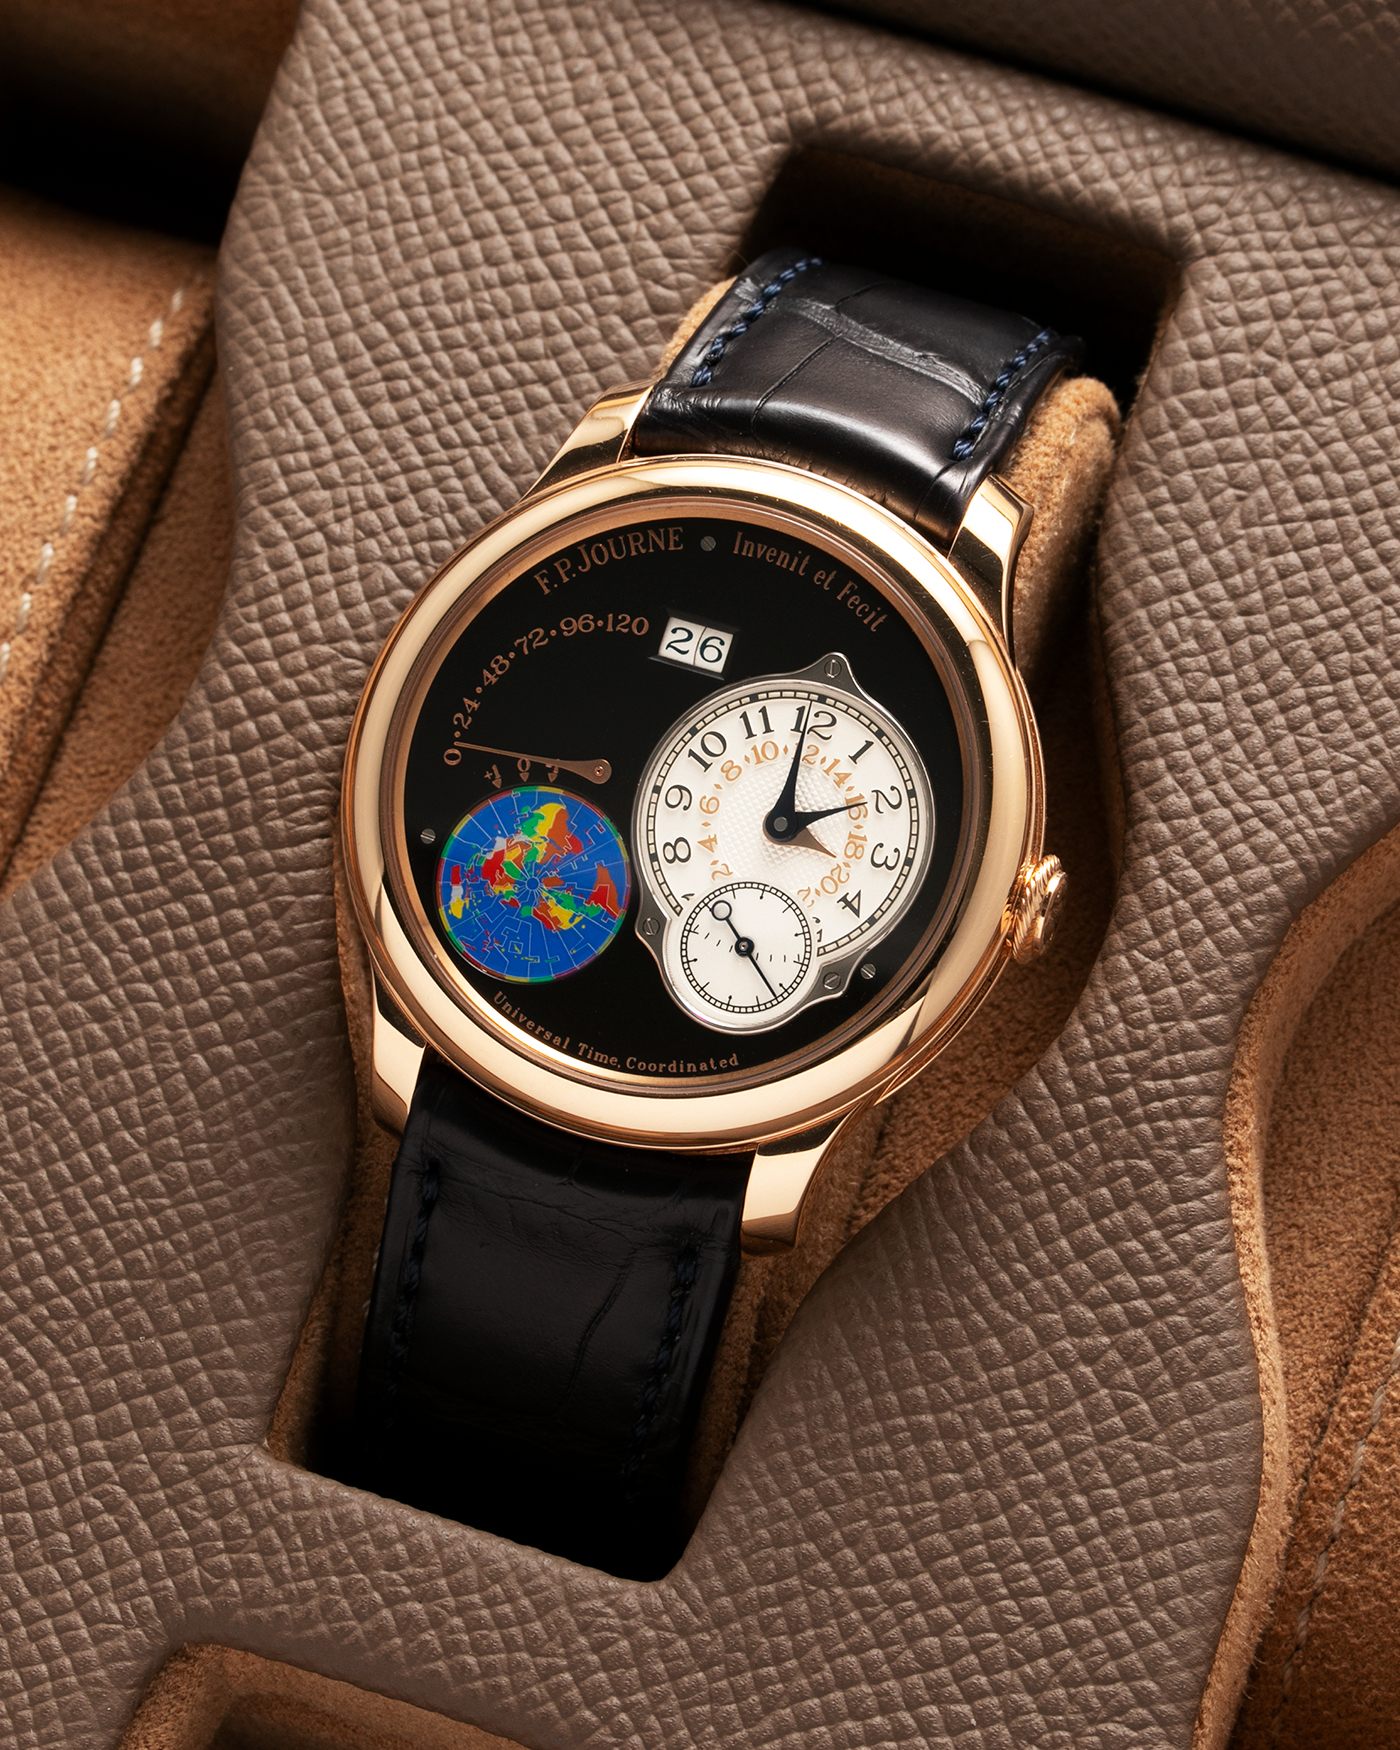 Brand: F. P. Journe. Year: 2020 Model: Octa UTC Material: 18-carat Rose Gold Movement: FPJ Cal. 1300-3 in 18-carat Rose Gold, Self-Winding Case Diameter: 40mm Bracelet / Strap: F. P. Journe Navy Black Alligator and 18-carat Rose Gold Signed Tang Buckle with additional F. P. Journe Aegean Blue Alligator Leather Strap, and Cobalt Blue Alligator Leather Strap. 